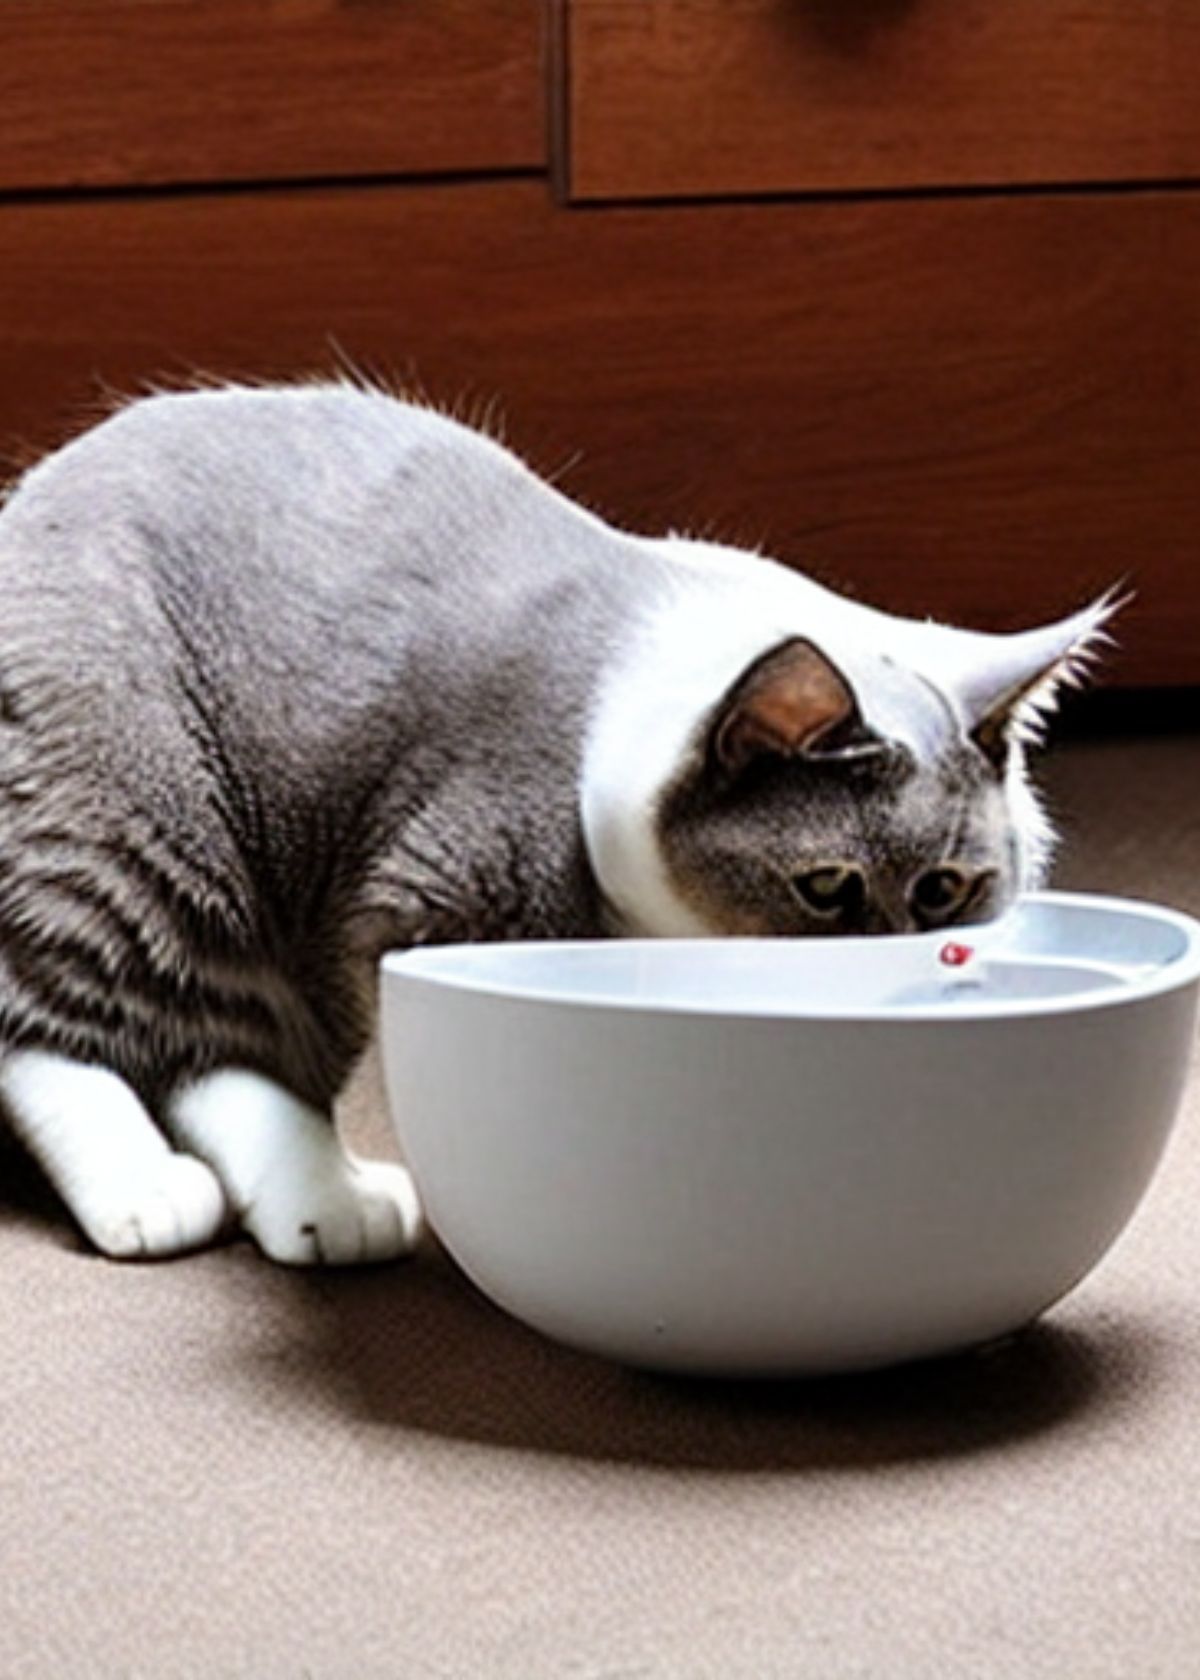 "Meow-ve over! Get Your Cat a Slow Eating Bowl on Amazon Today"